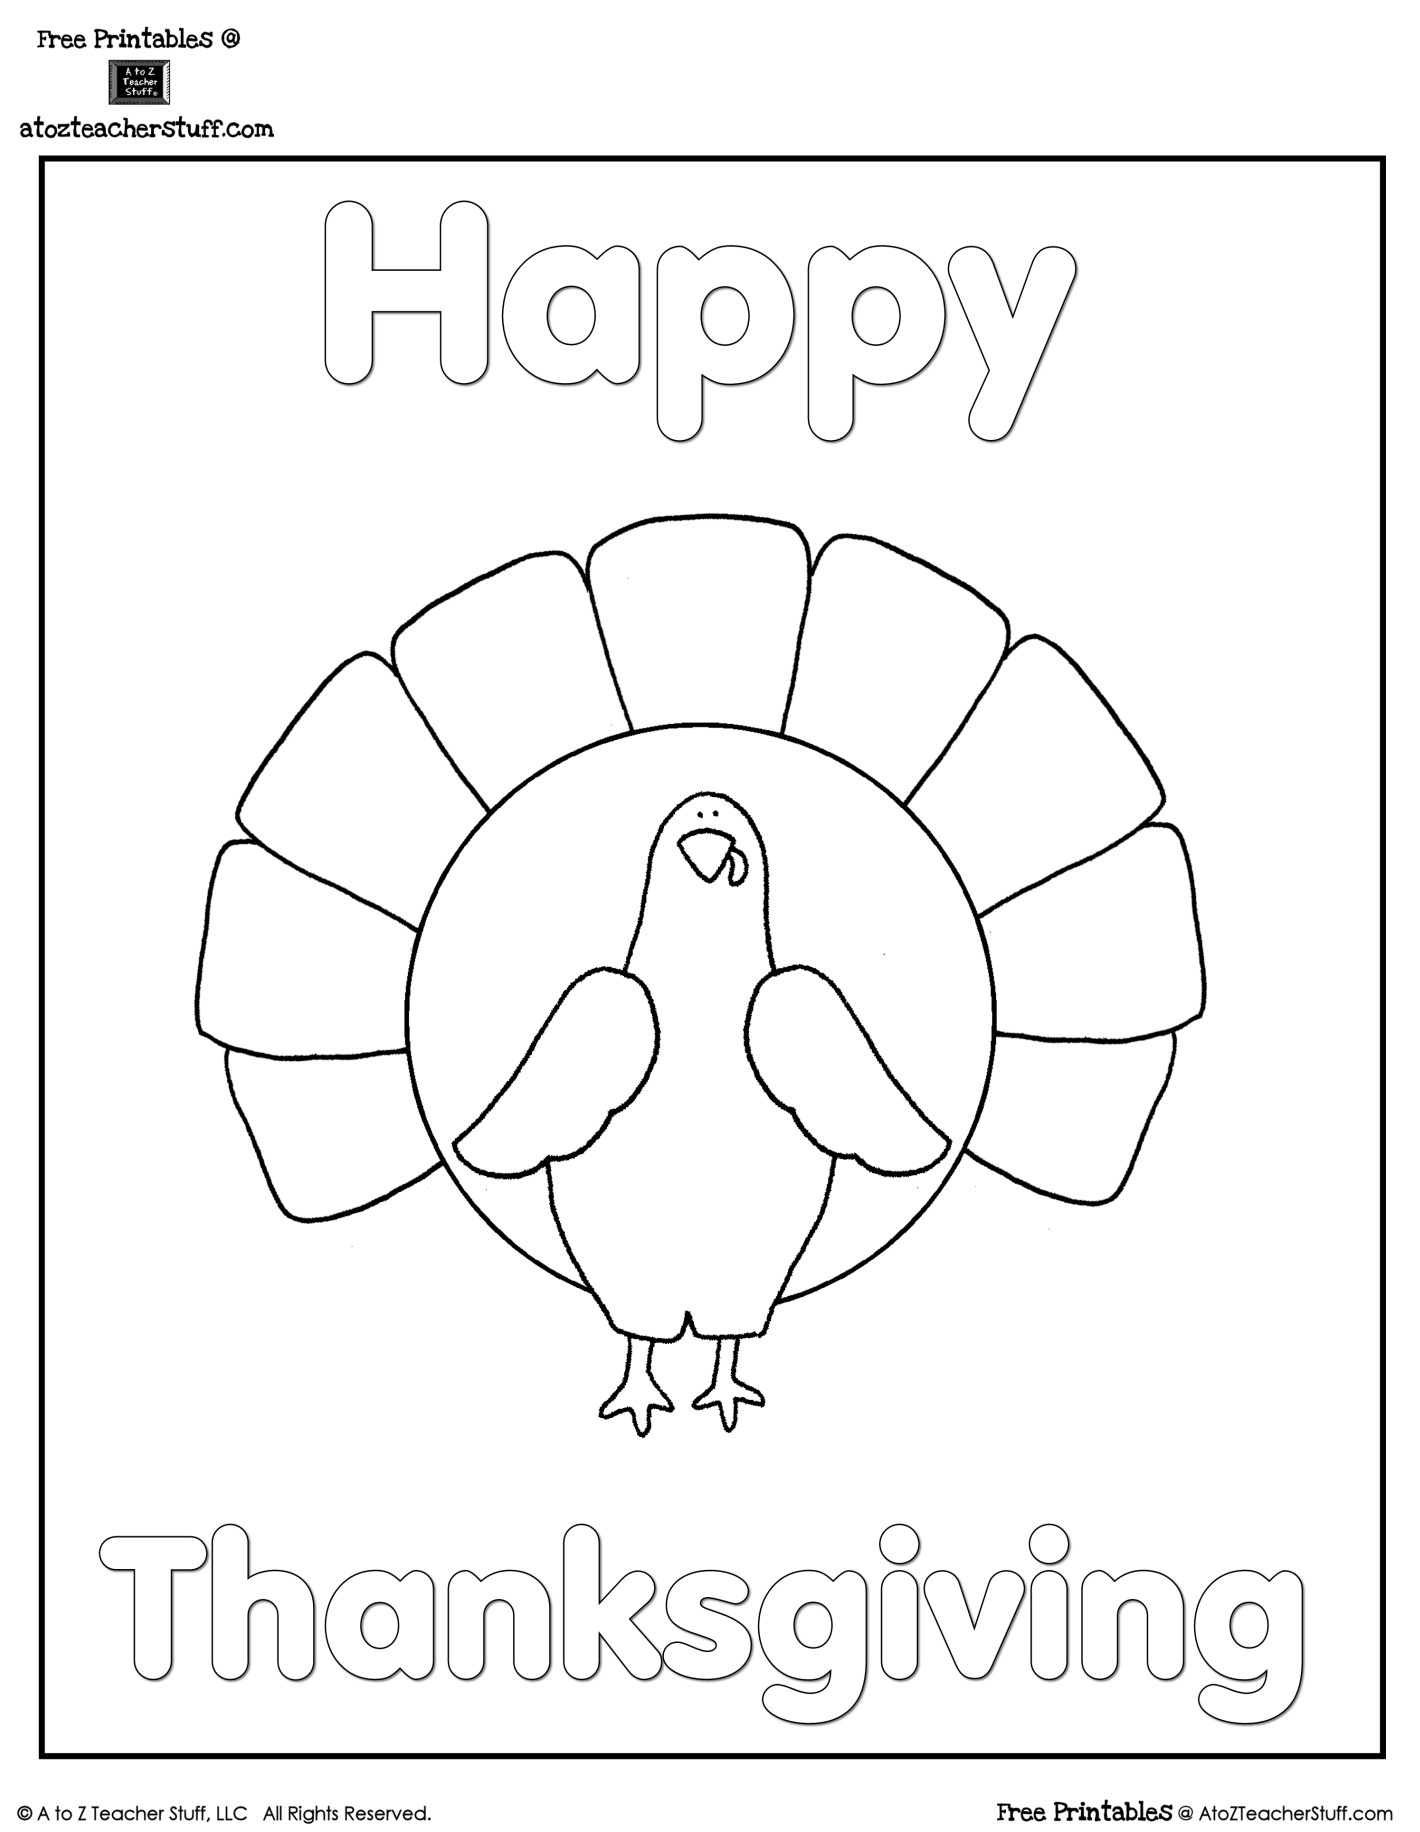 Turkey Coloring Sheet | A to Z Teacher Stuff Printable Pages and ...